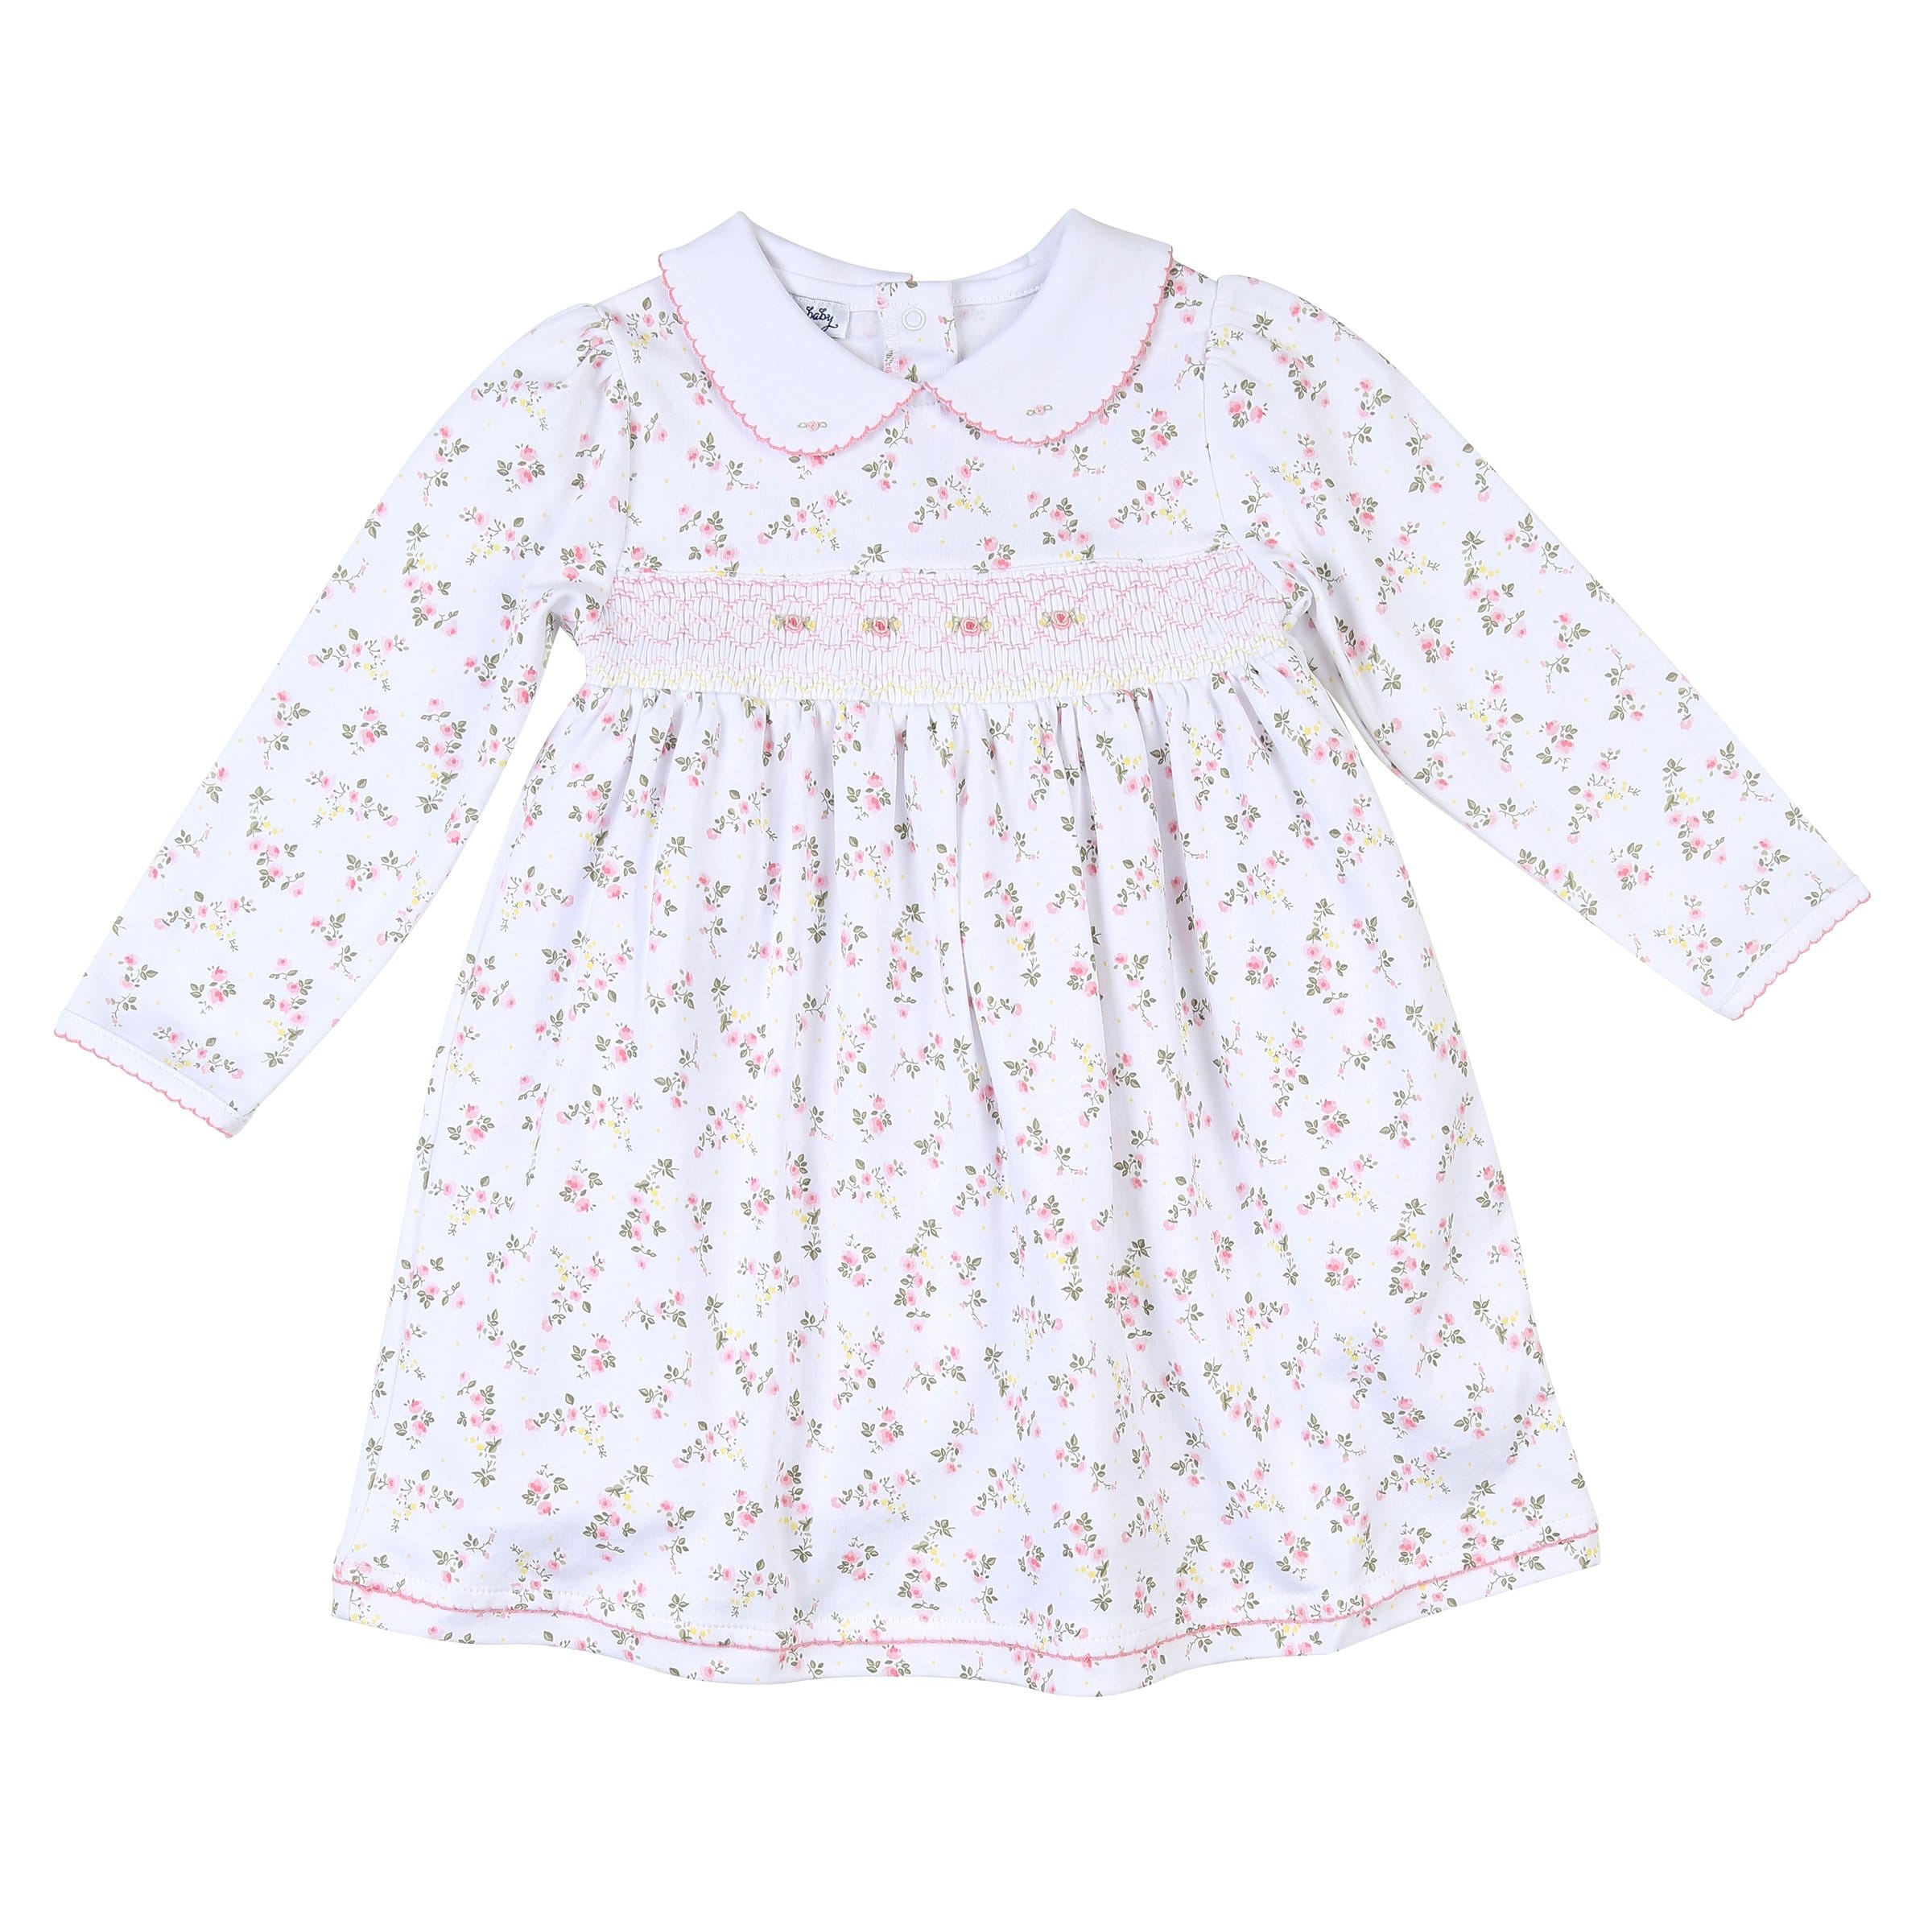 MAGNOLIA BABY - Graces Classics Smocked Dress - Floral